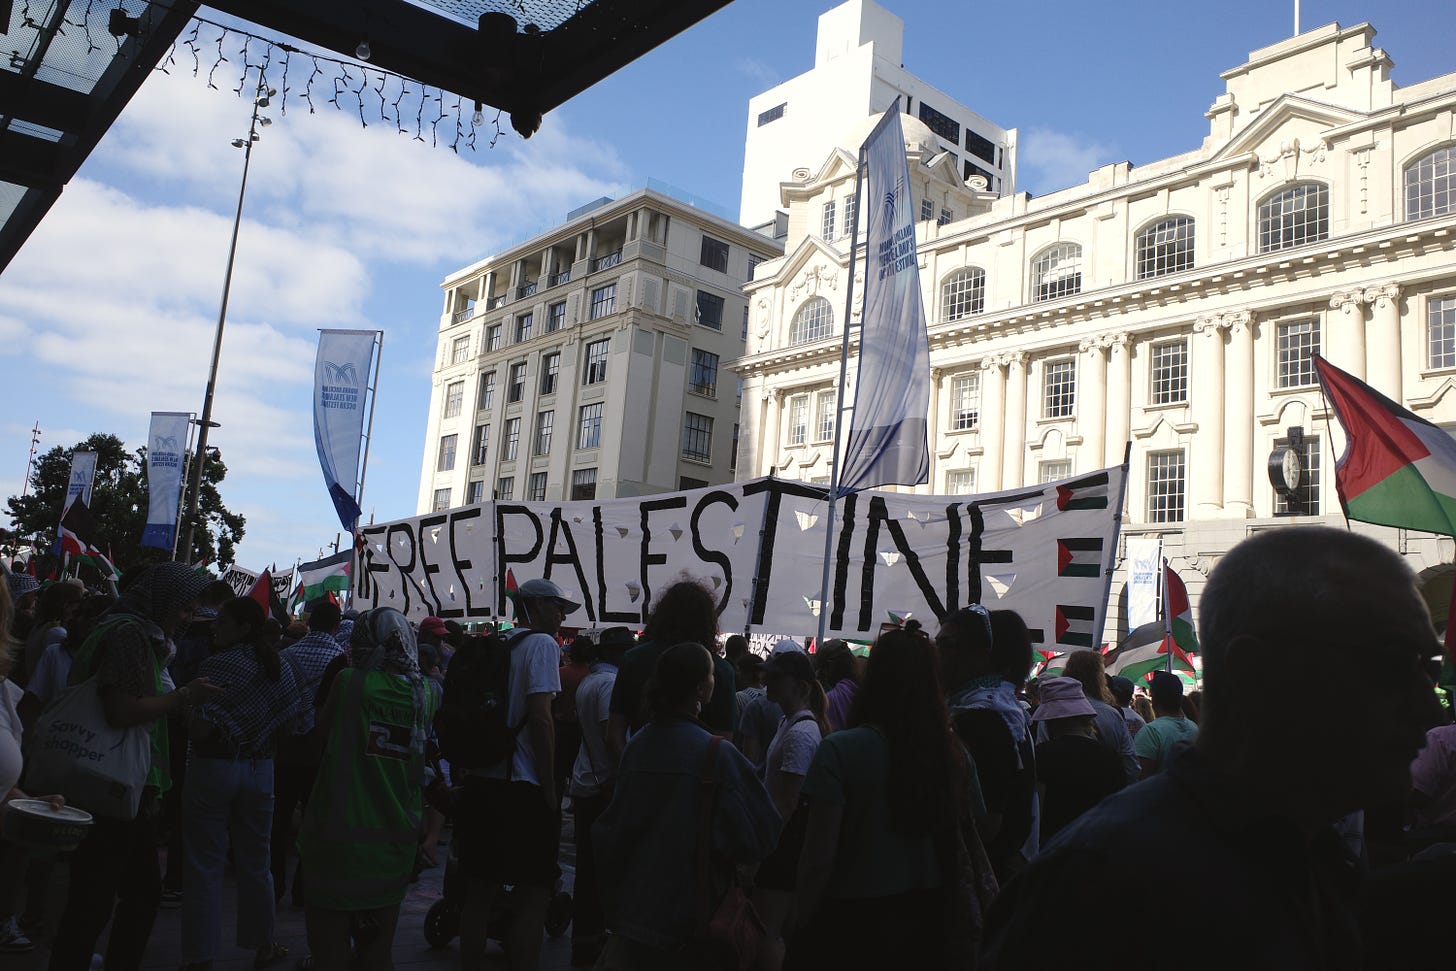 A Palestine protest march with an extra large "Free Palestine" banner